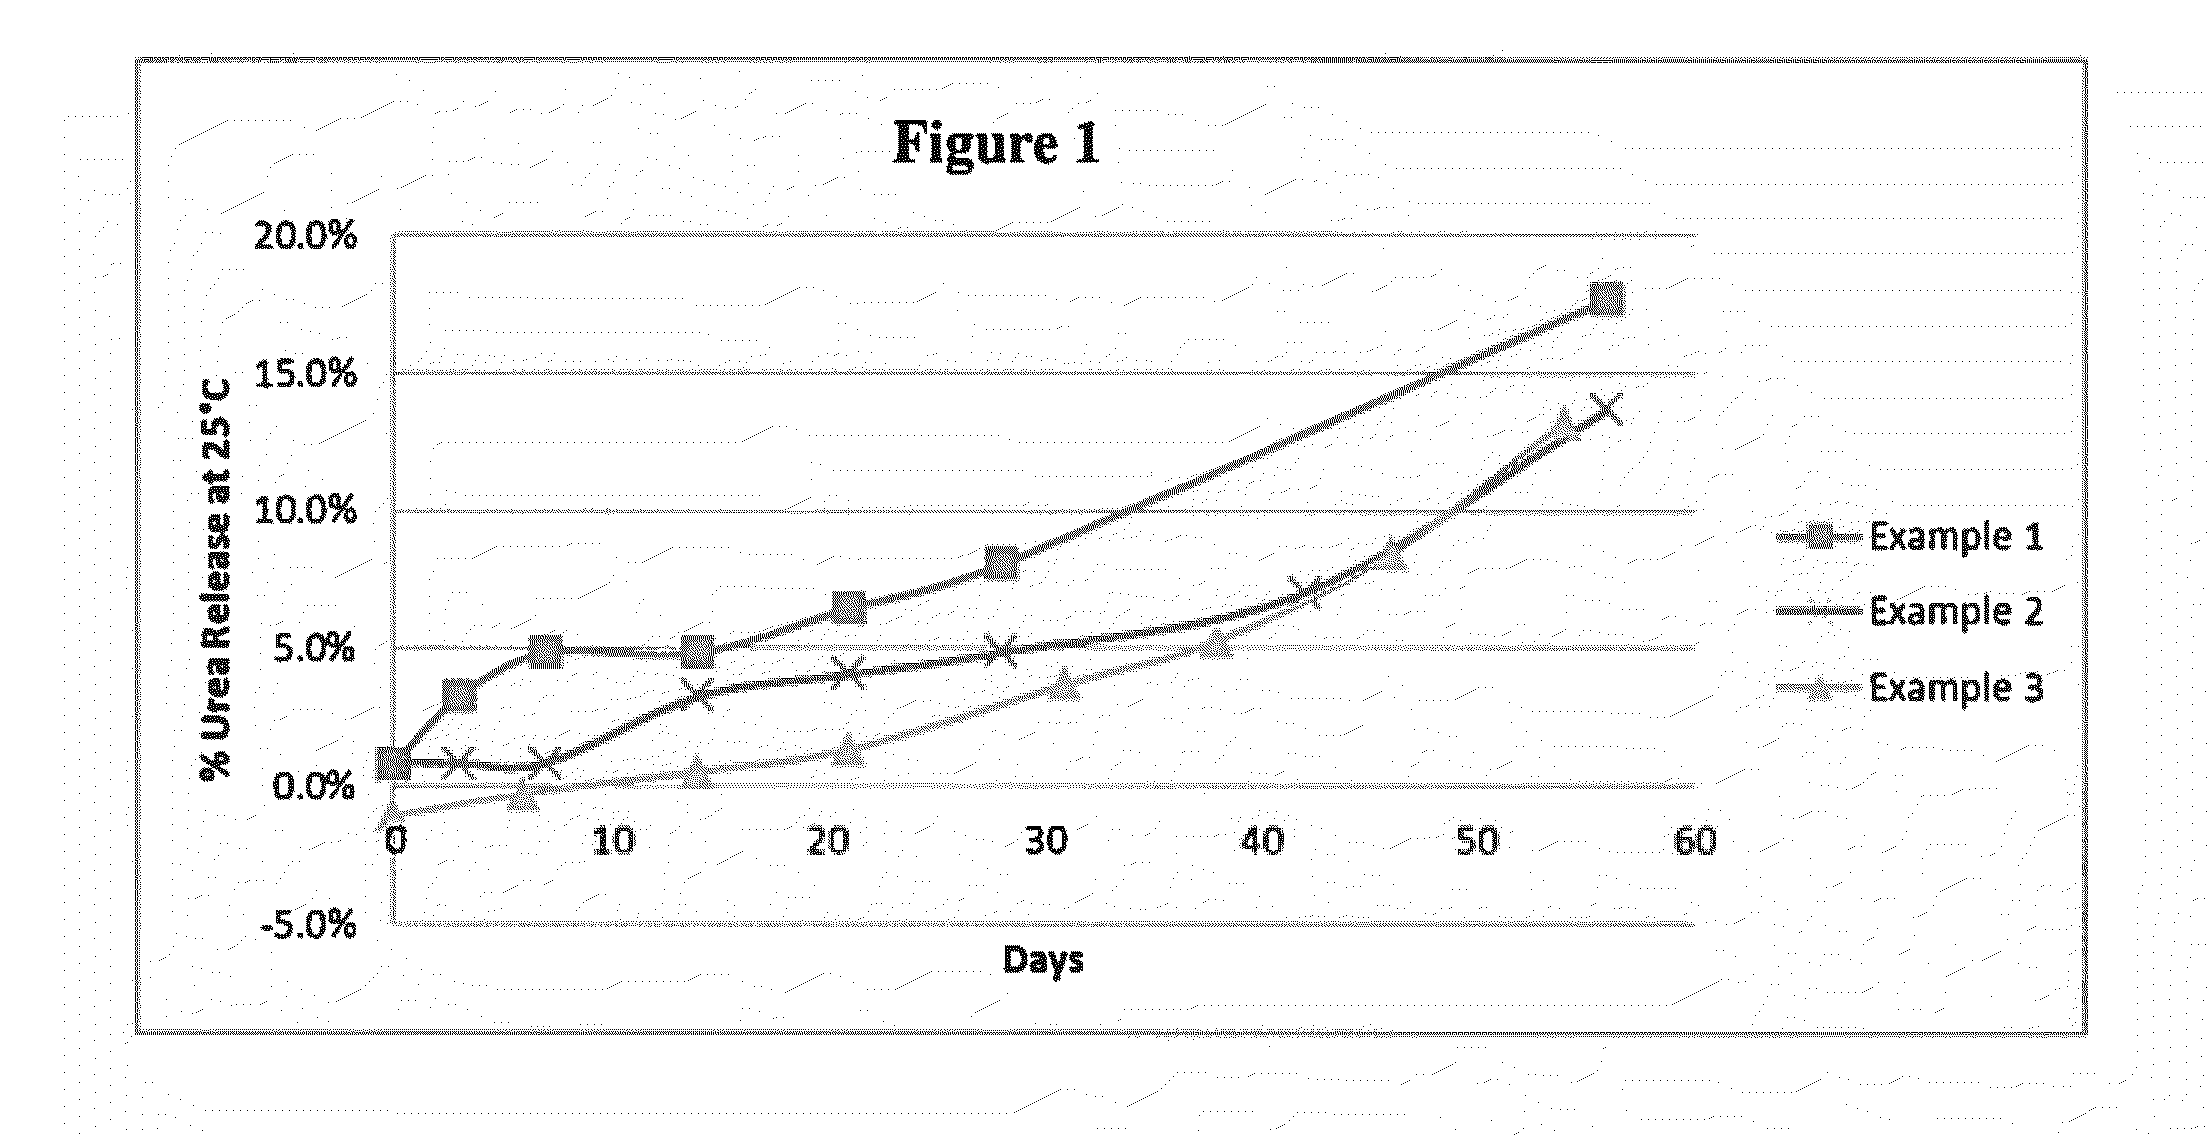 Polymer coated fertilizer compositions and methods of making thereof